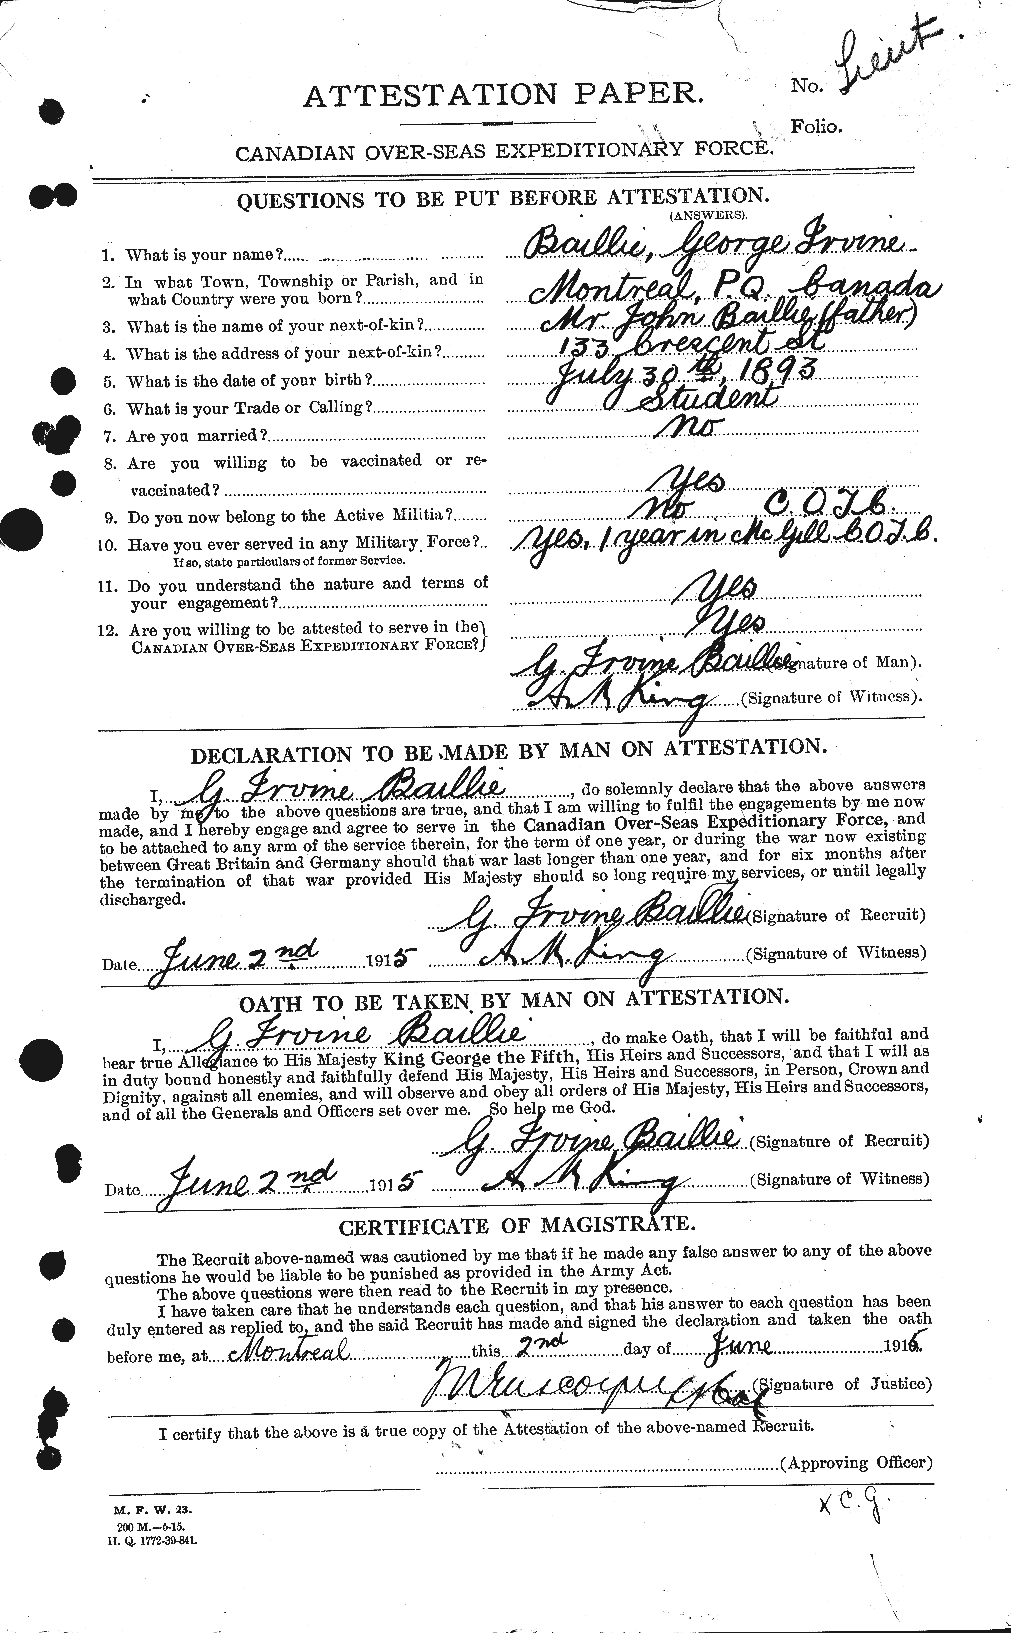 Personnel Records of the First World War - CEF 226255a